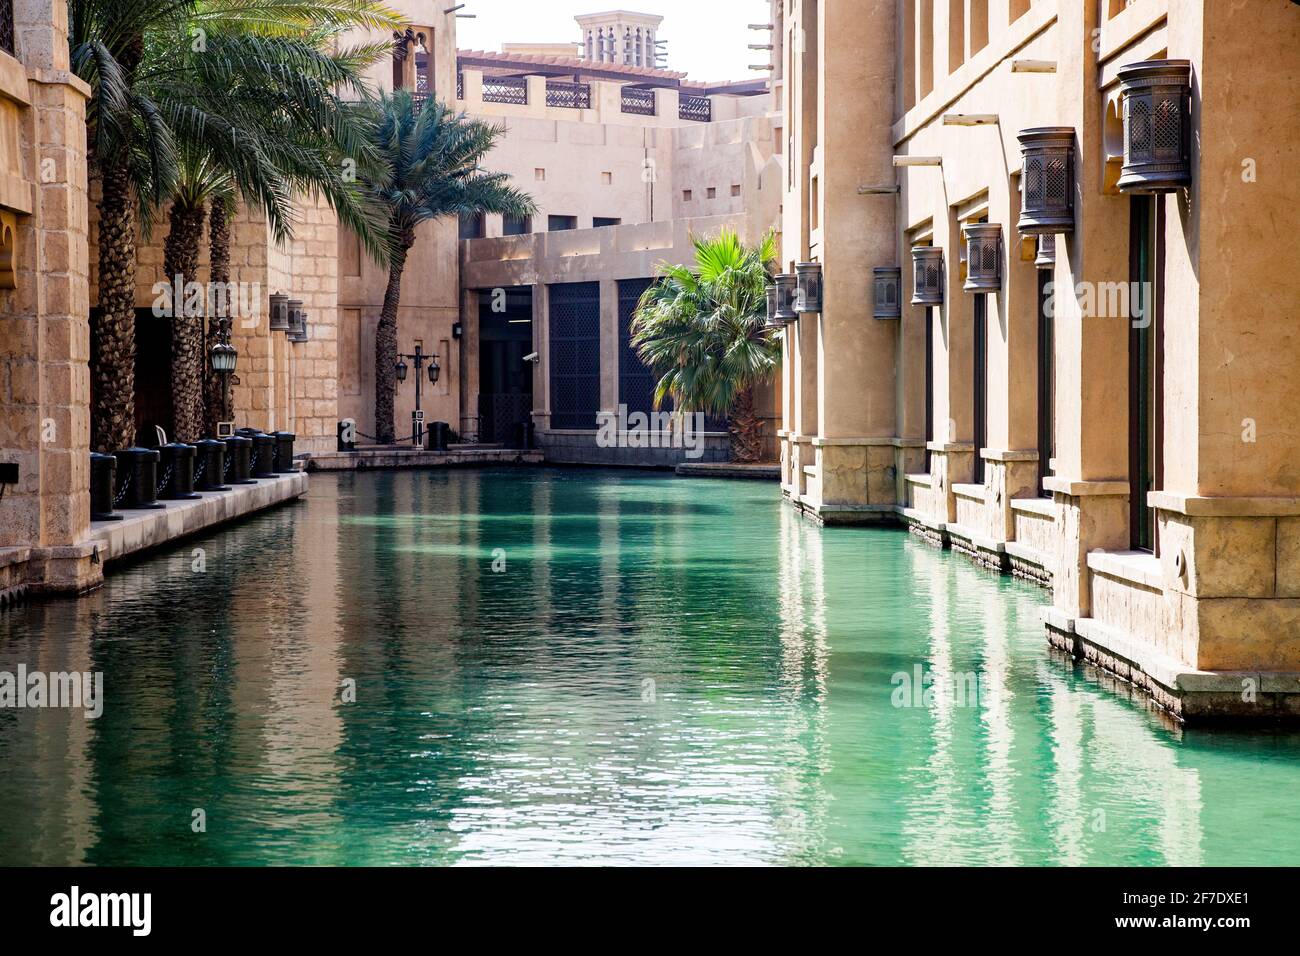 DUBAI, UAE - FEBRUARY, 2018: Madinat Jumeirah, a luxury resort which include hotels and souk spreding across over 40 hectars Stock Photo